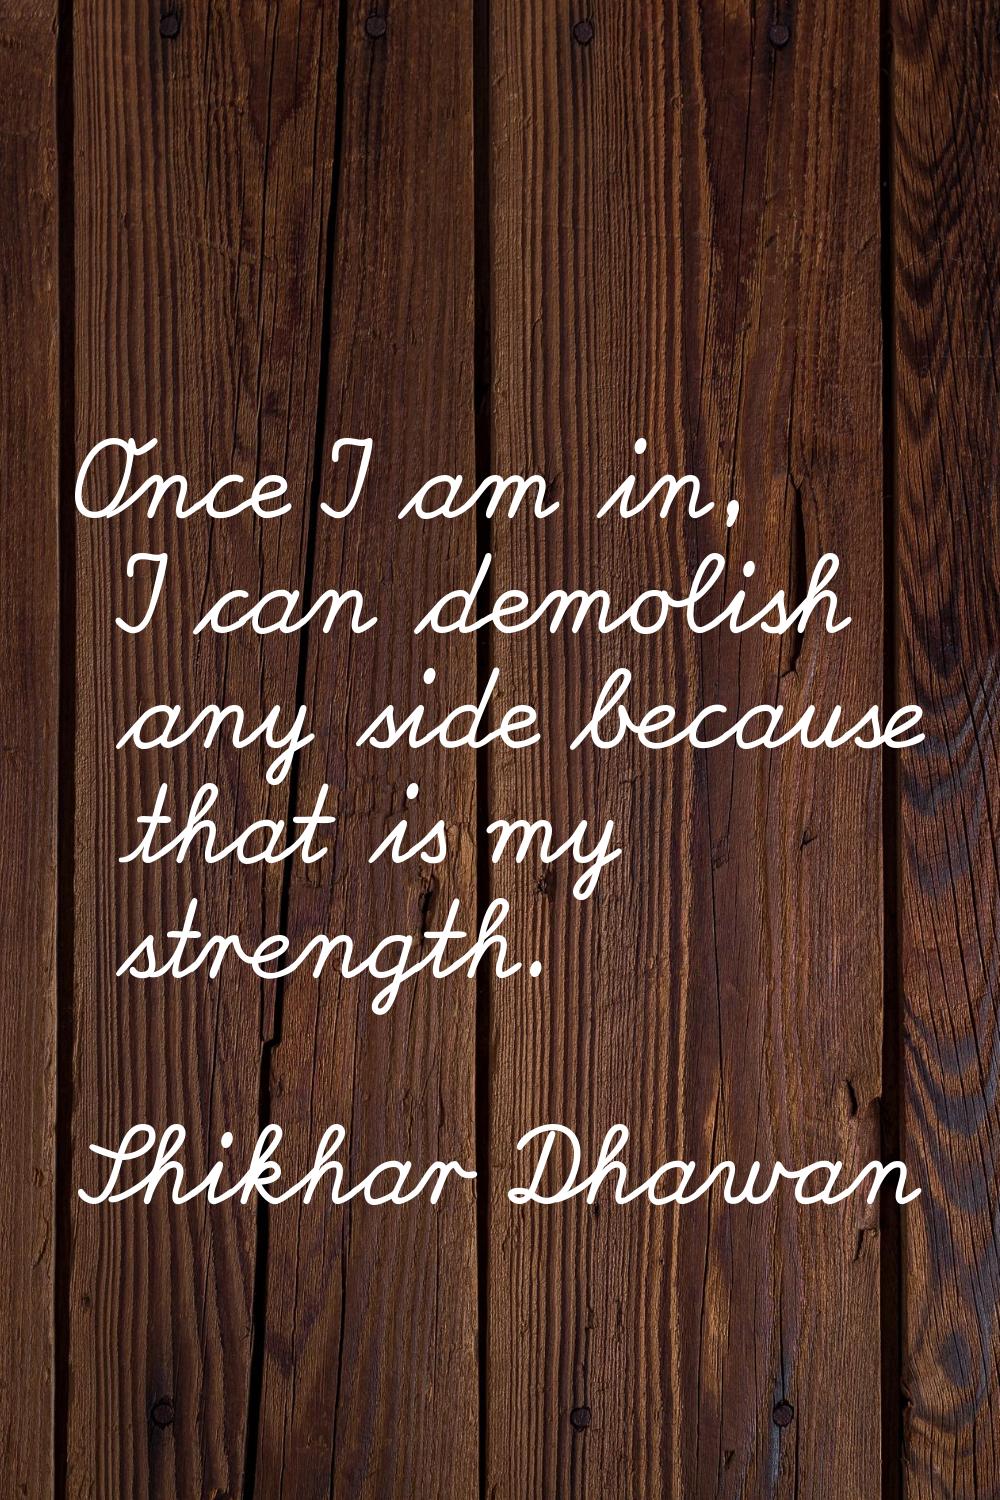 Once I am in, I can demolish any side because that is my strength.